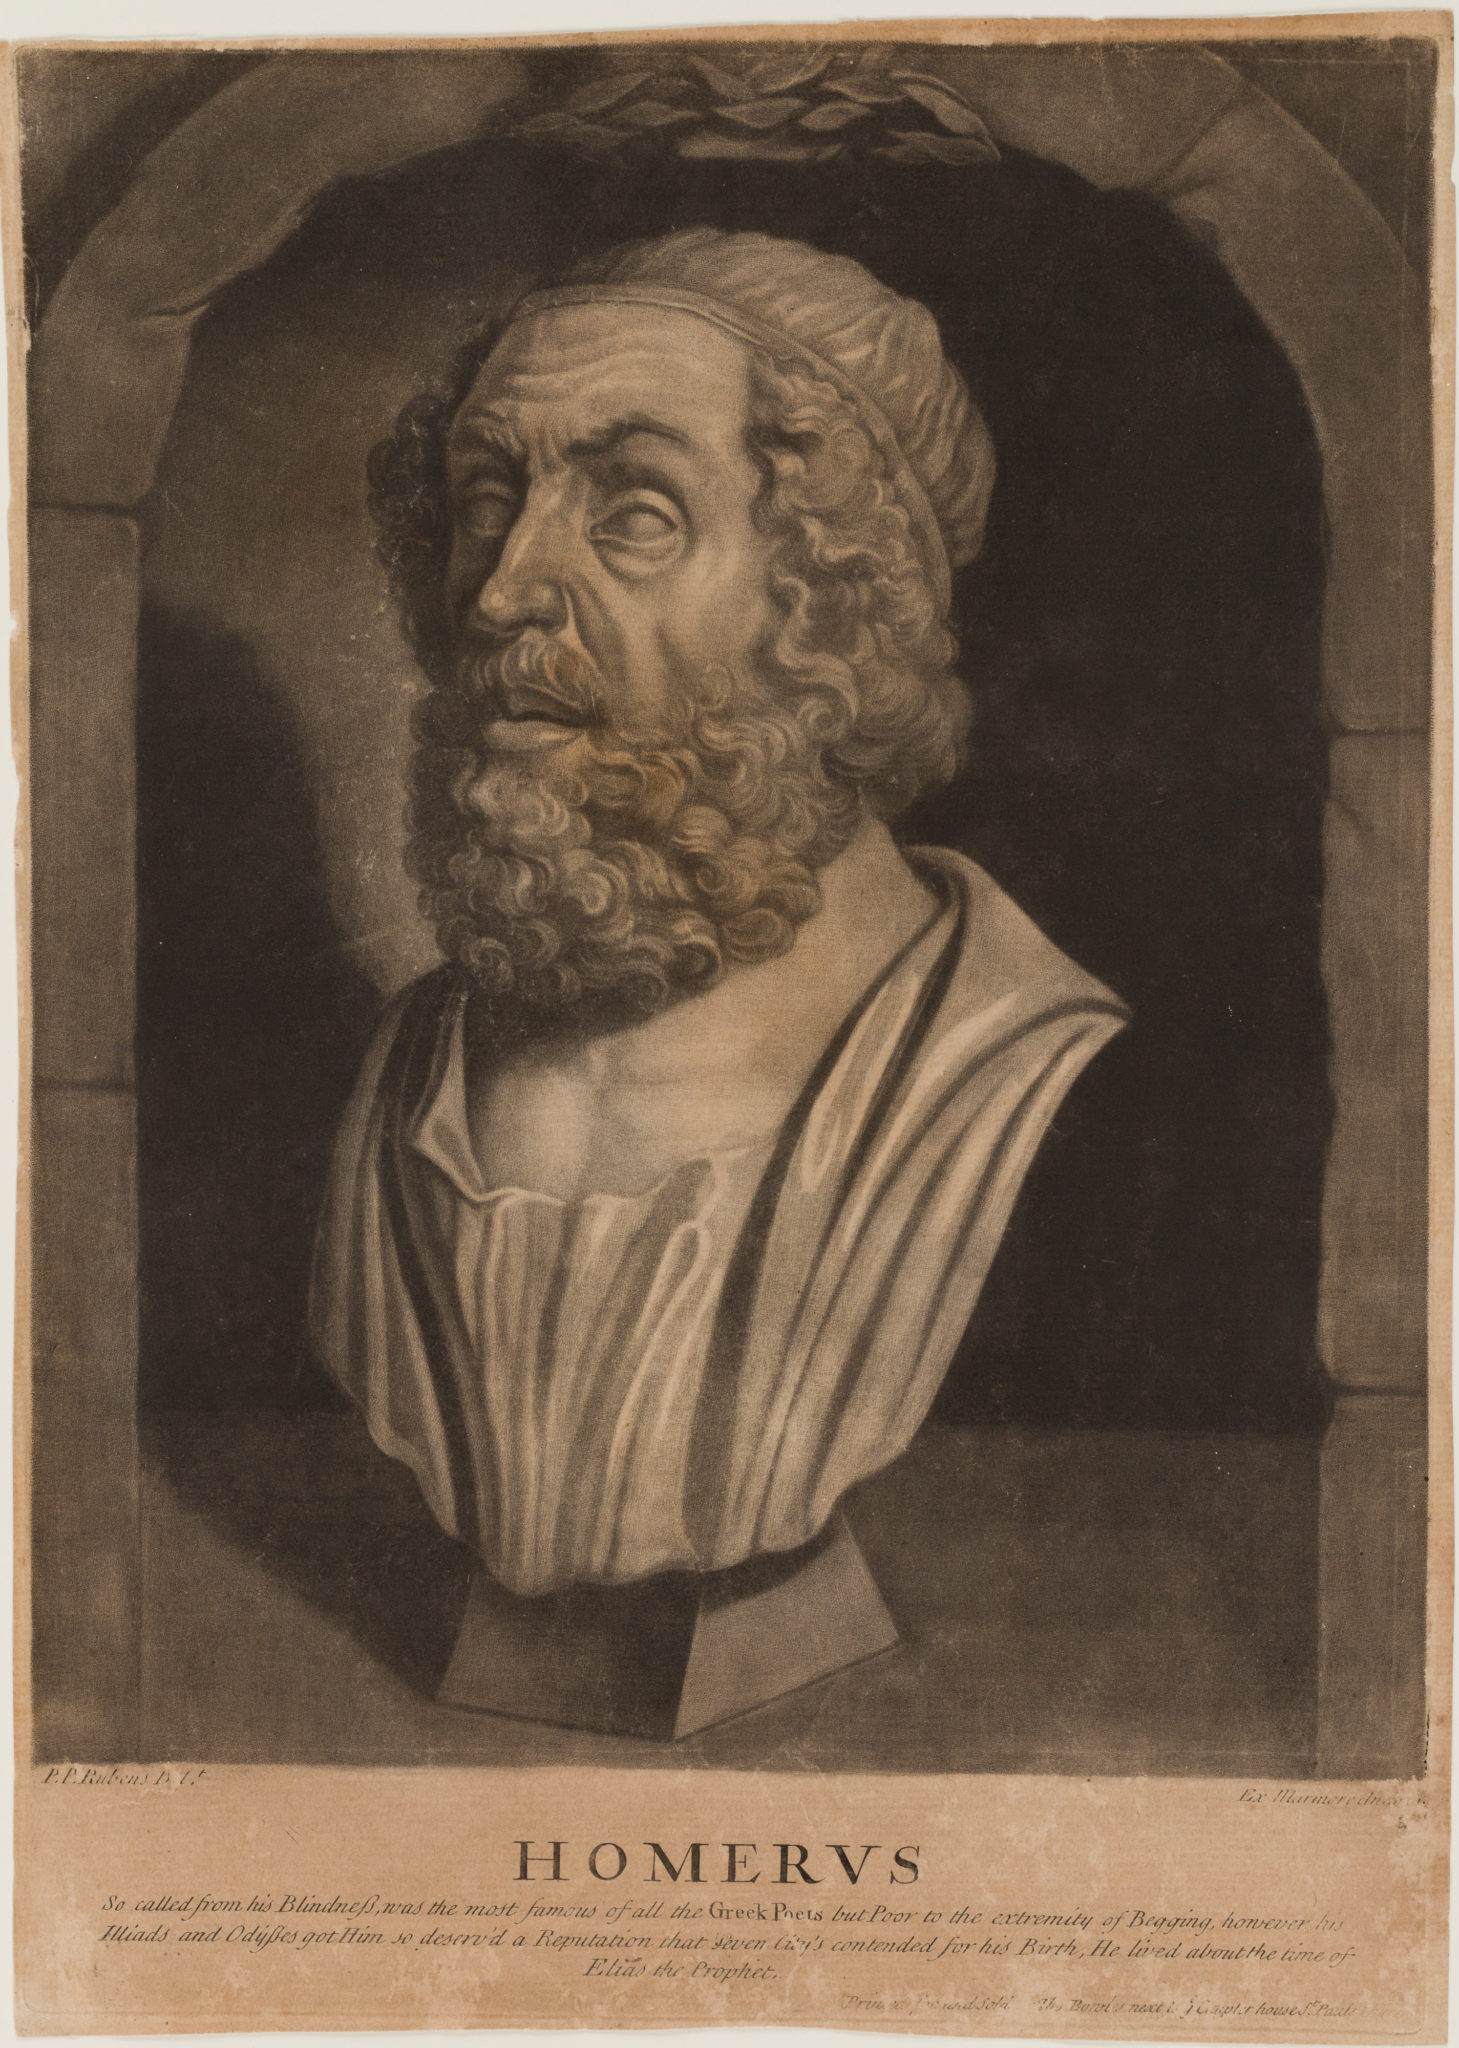 Tinted print featuring the bust of a man with curly hair, a long beard, and a toga. "Homer" printed below, above faint text.